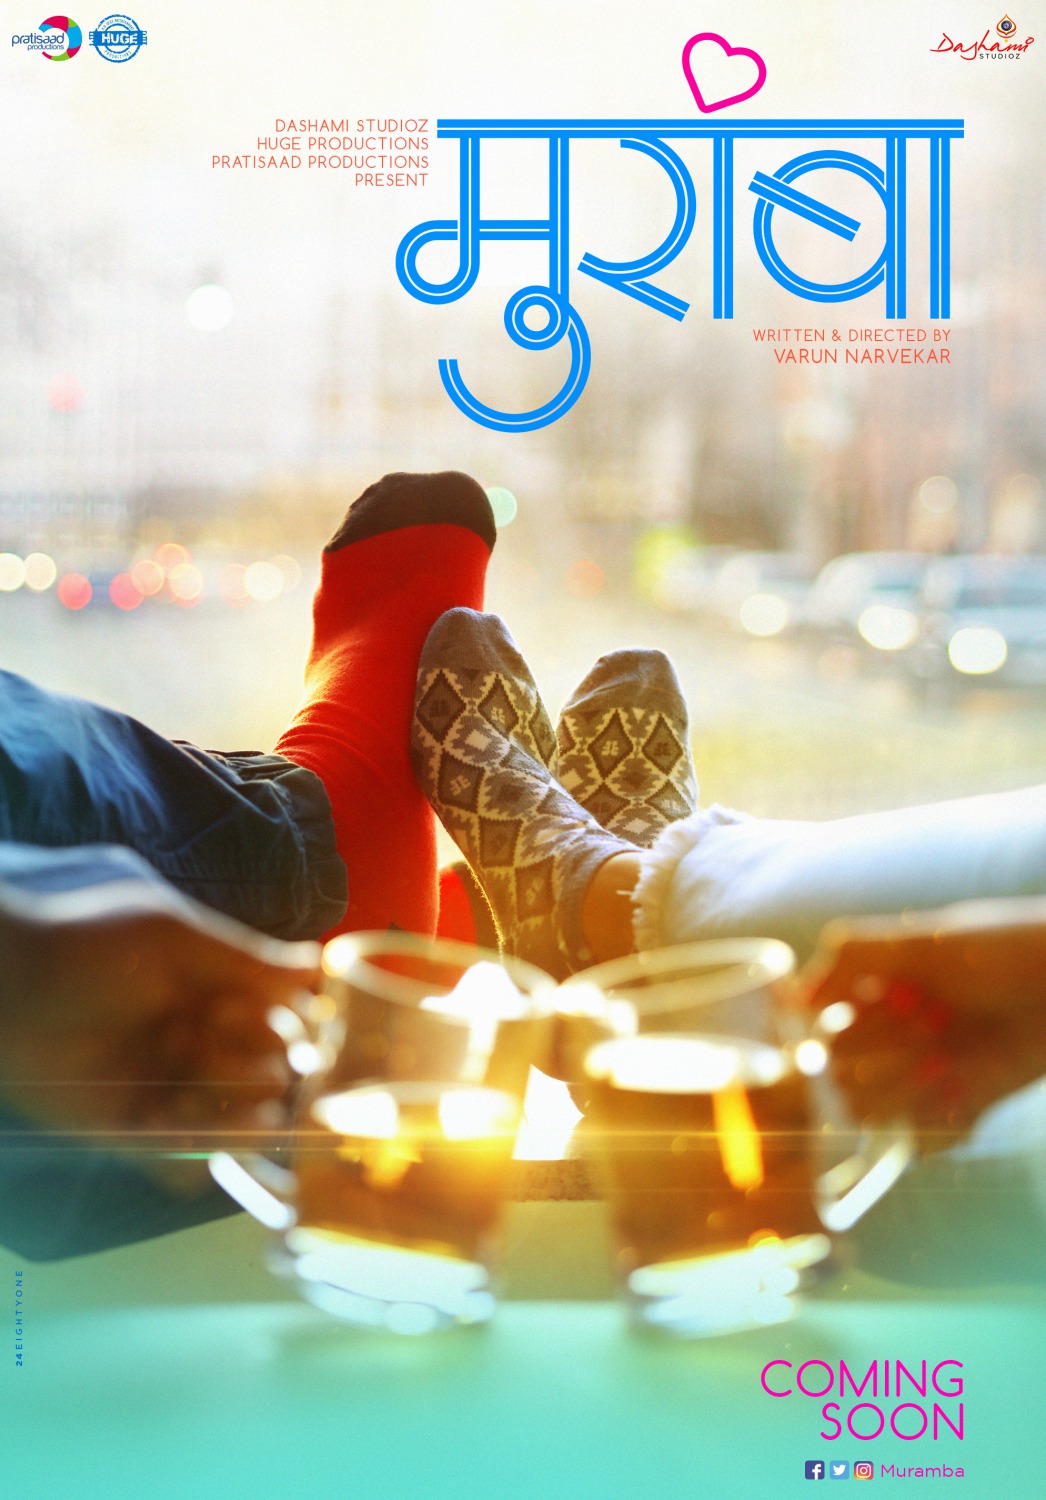 Extra Large Movie Poster Image for Muramba (#2 of 6)